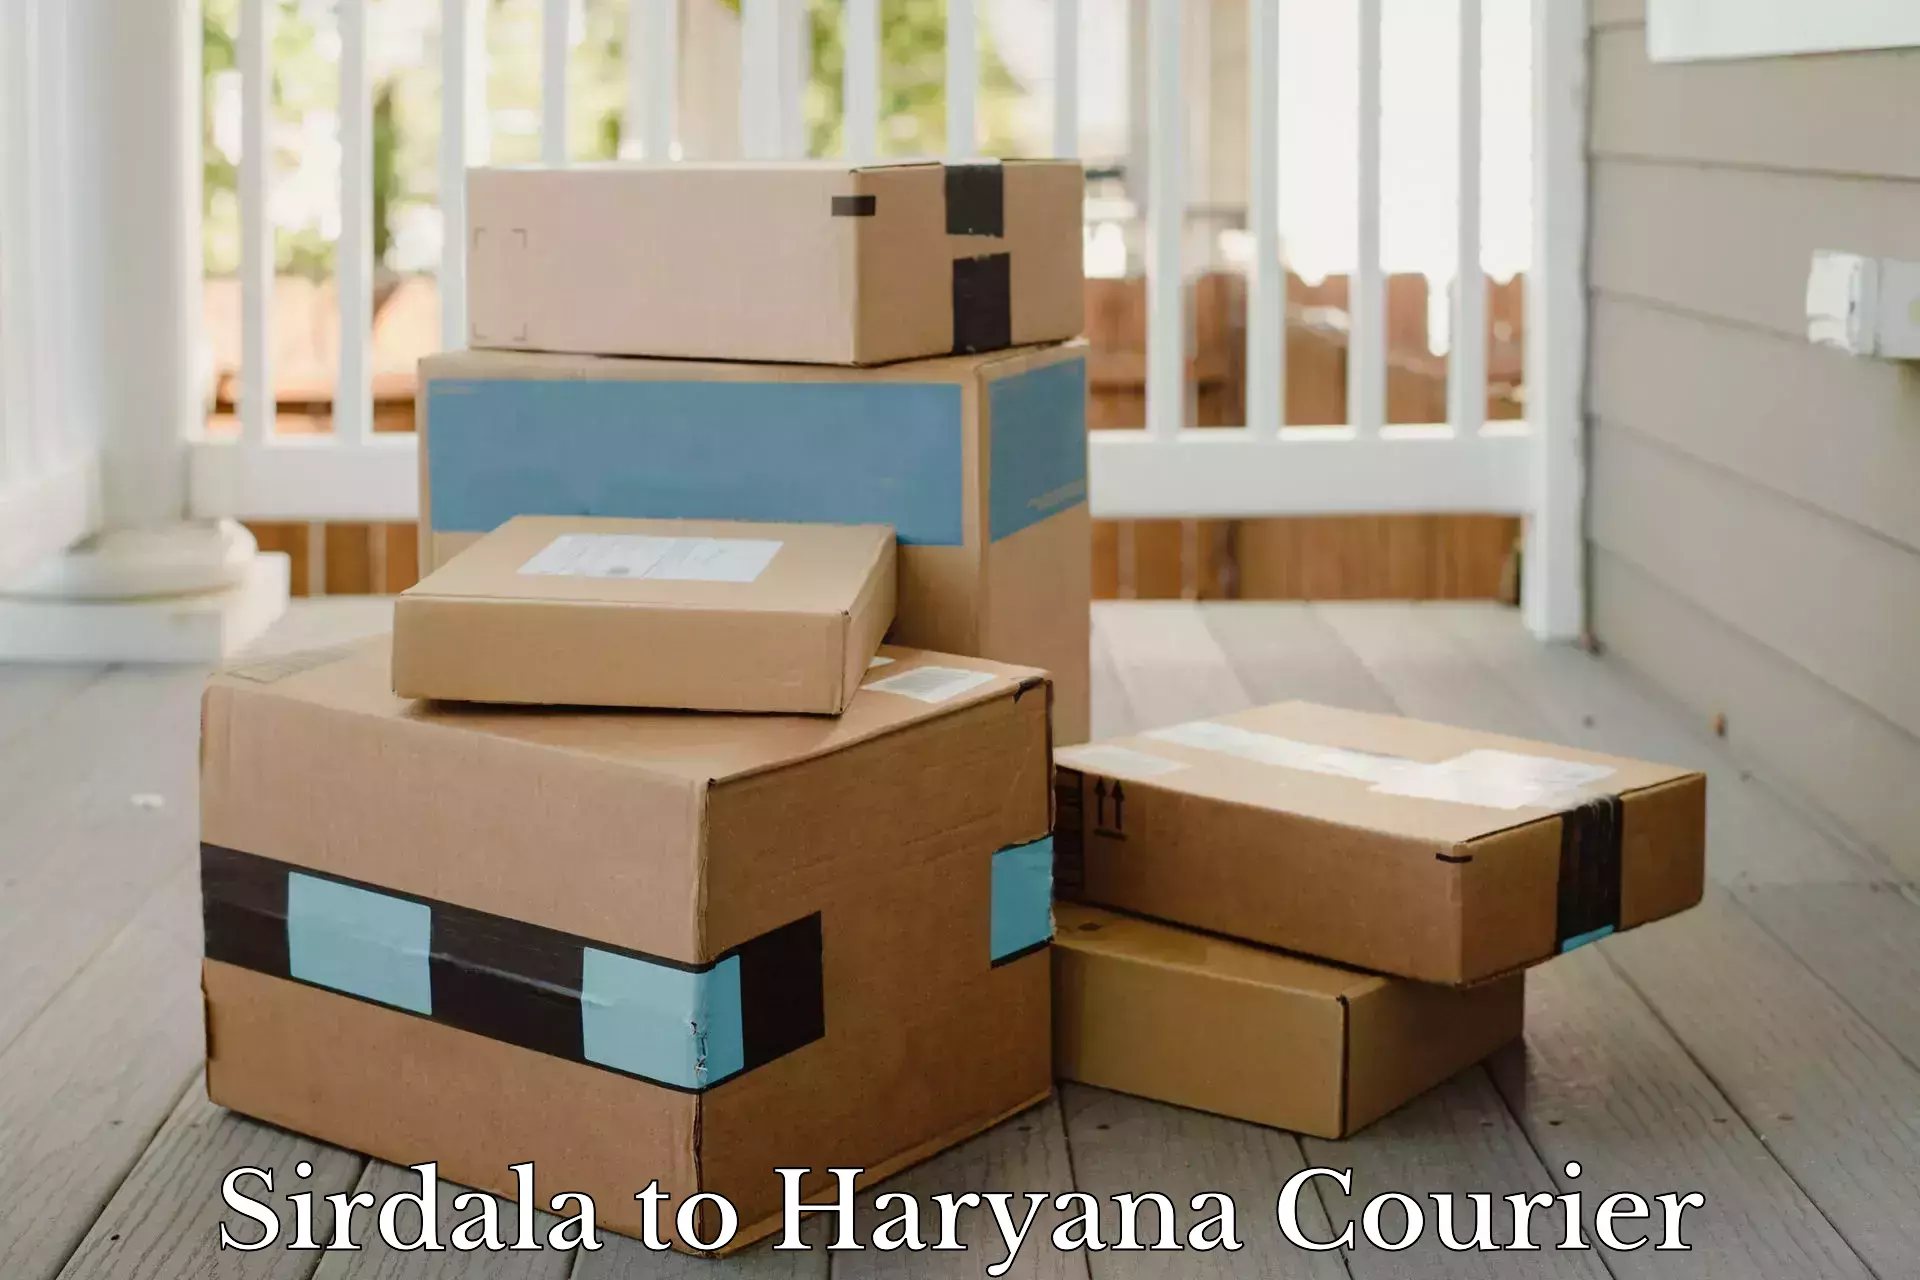 Residential courier service Sirdala to Haryana